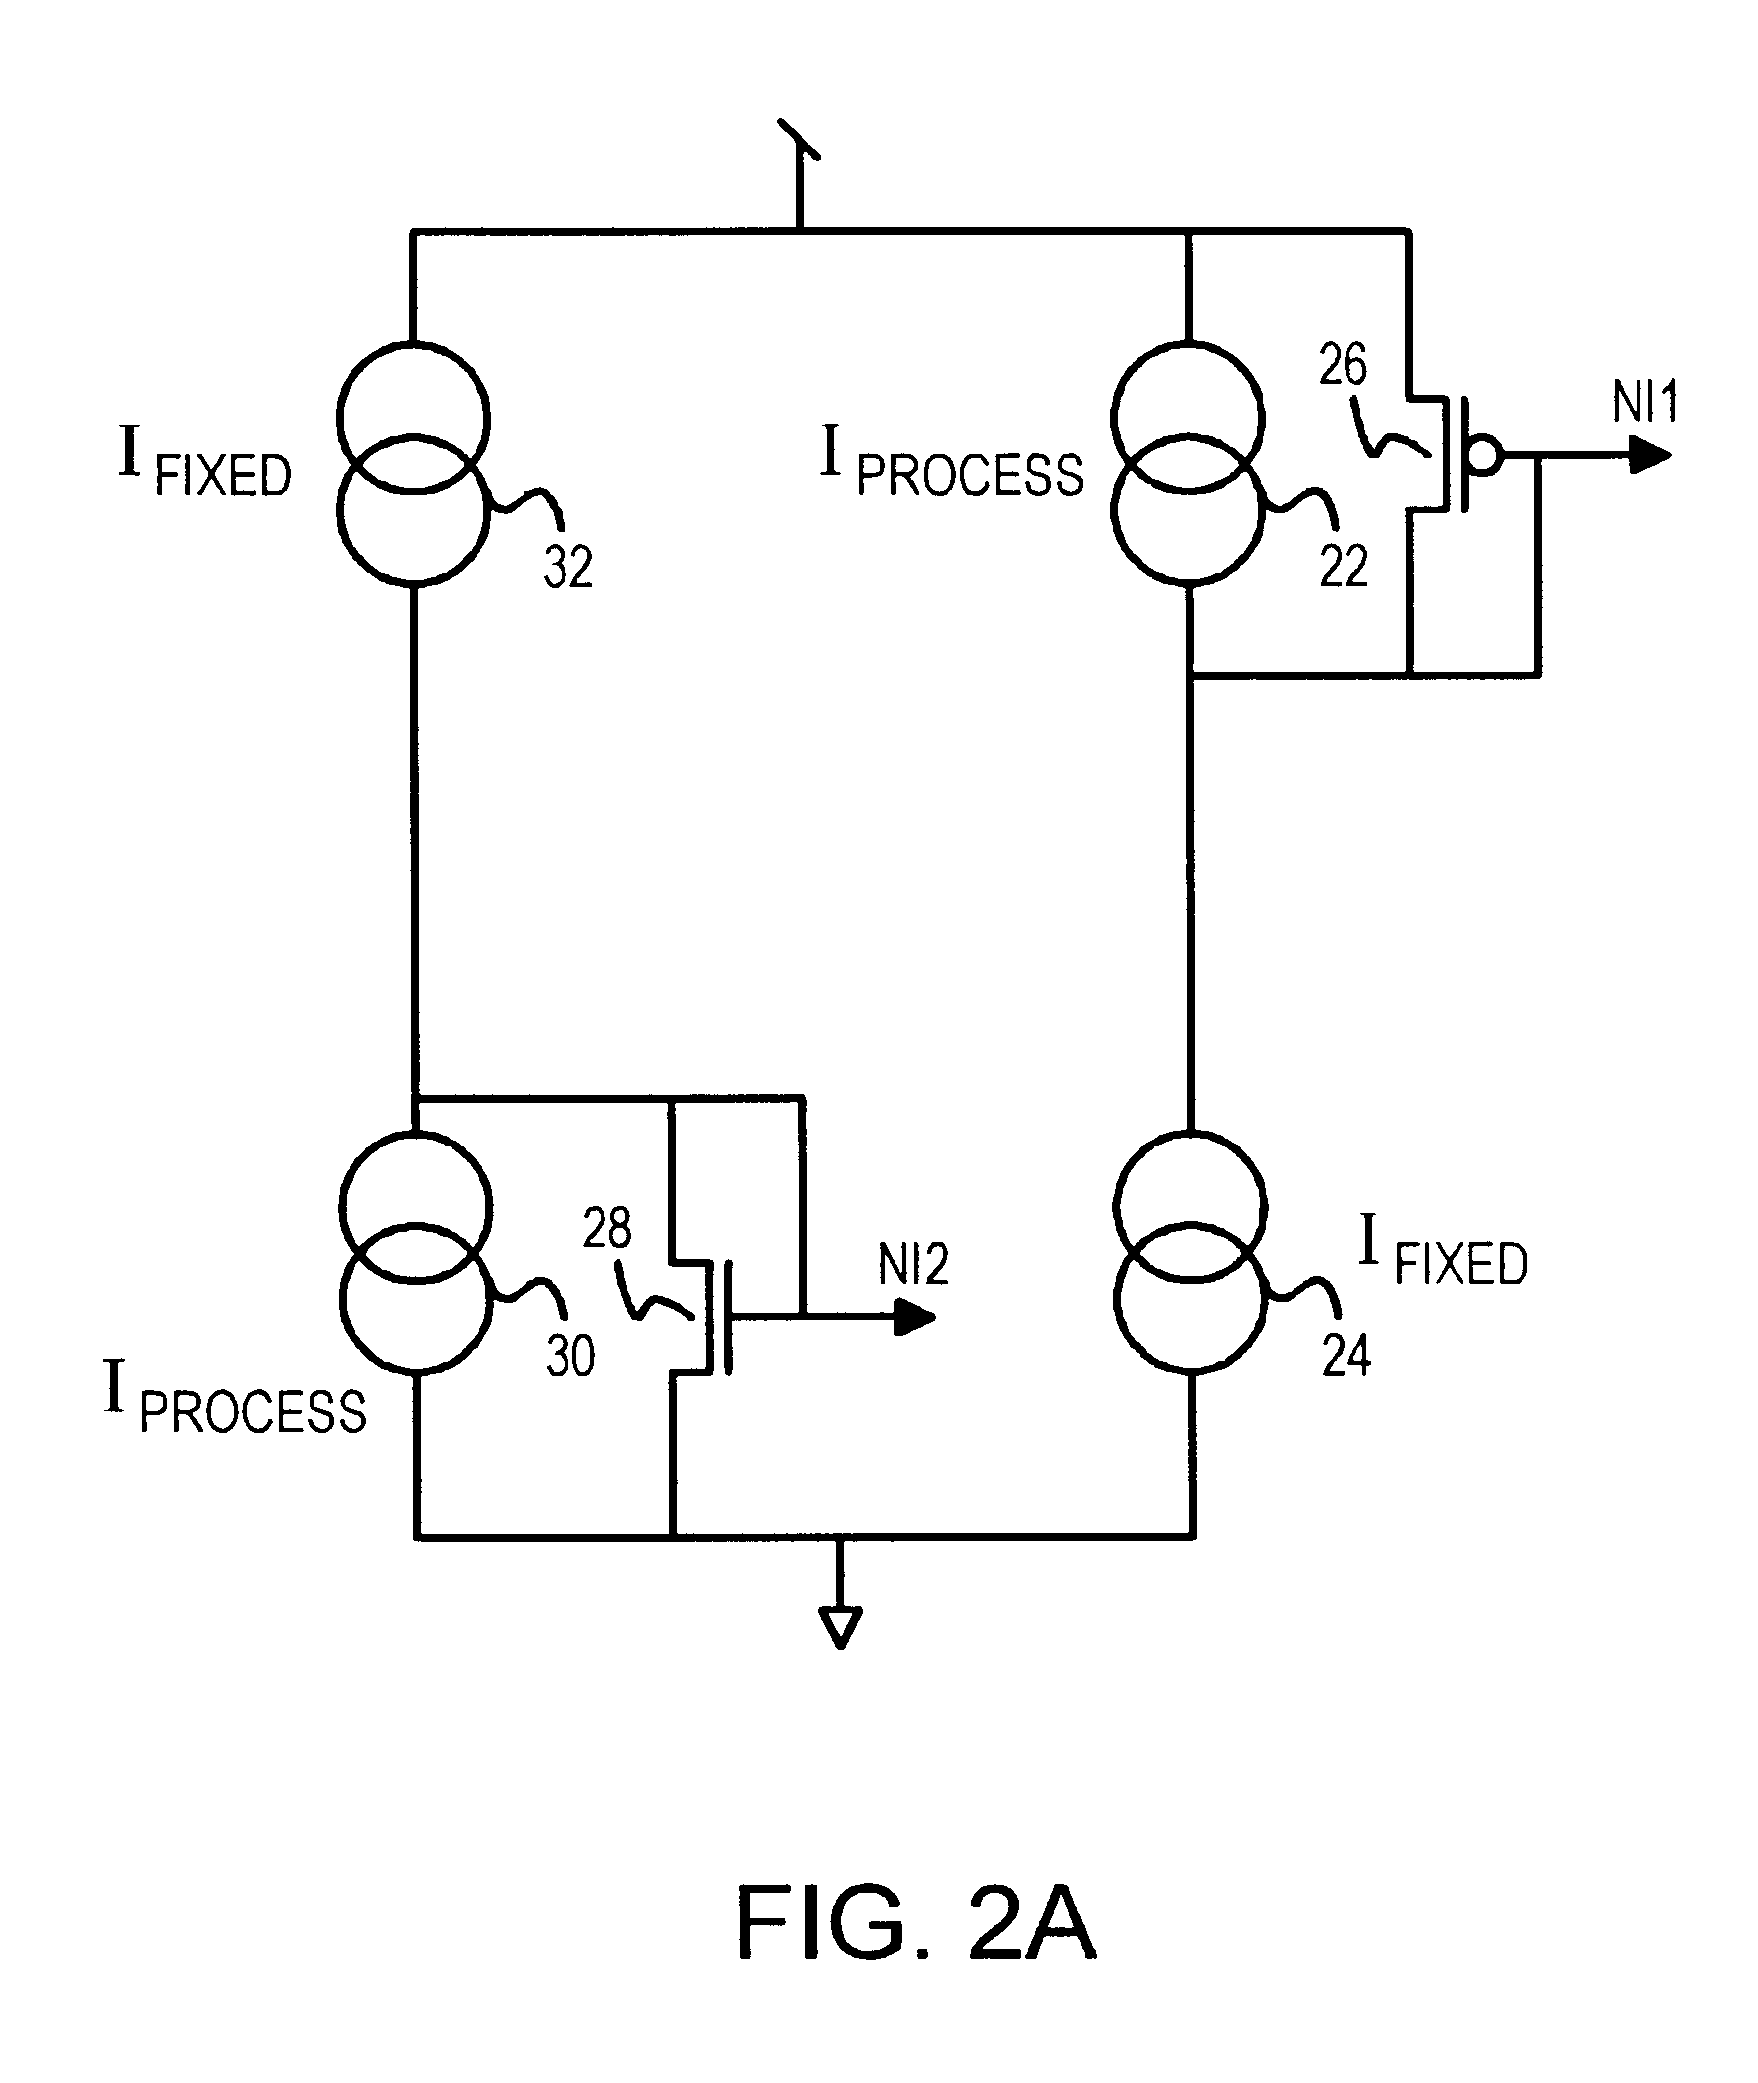 Current-compensated CMOS output buffer adjusting edge rate for process, temperature, and Vcc variations